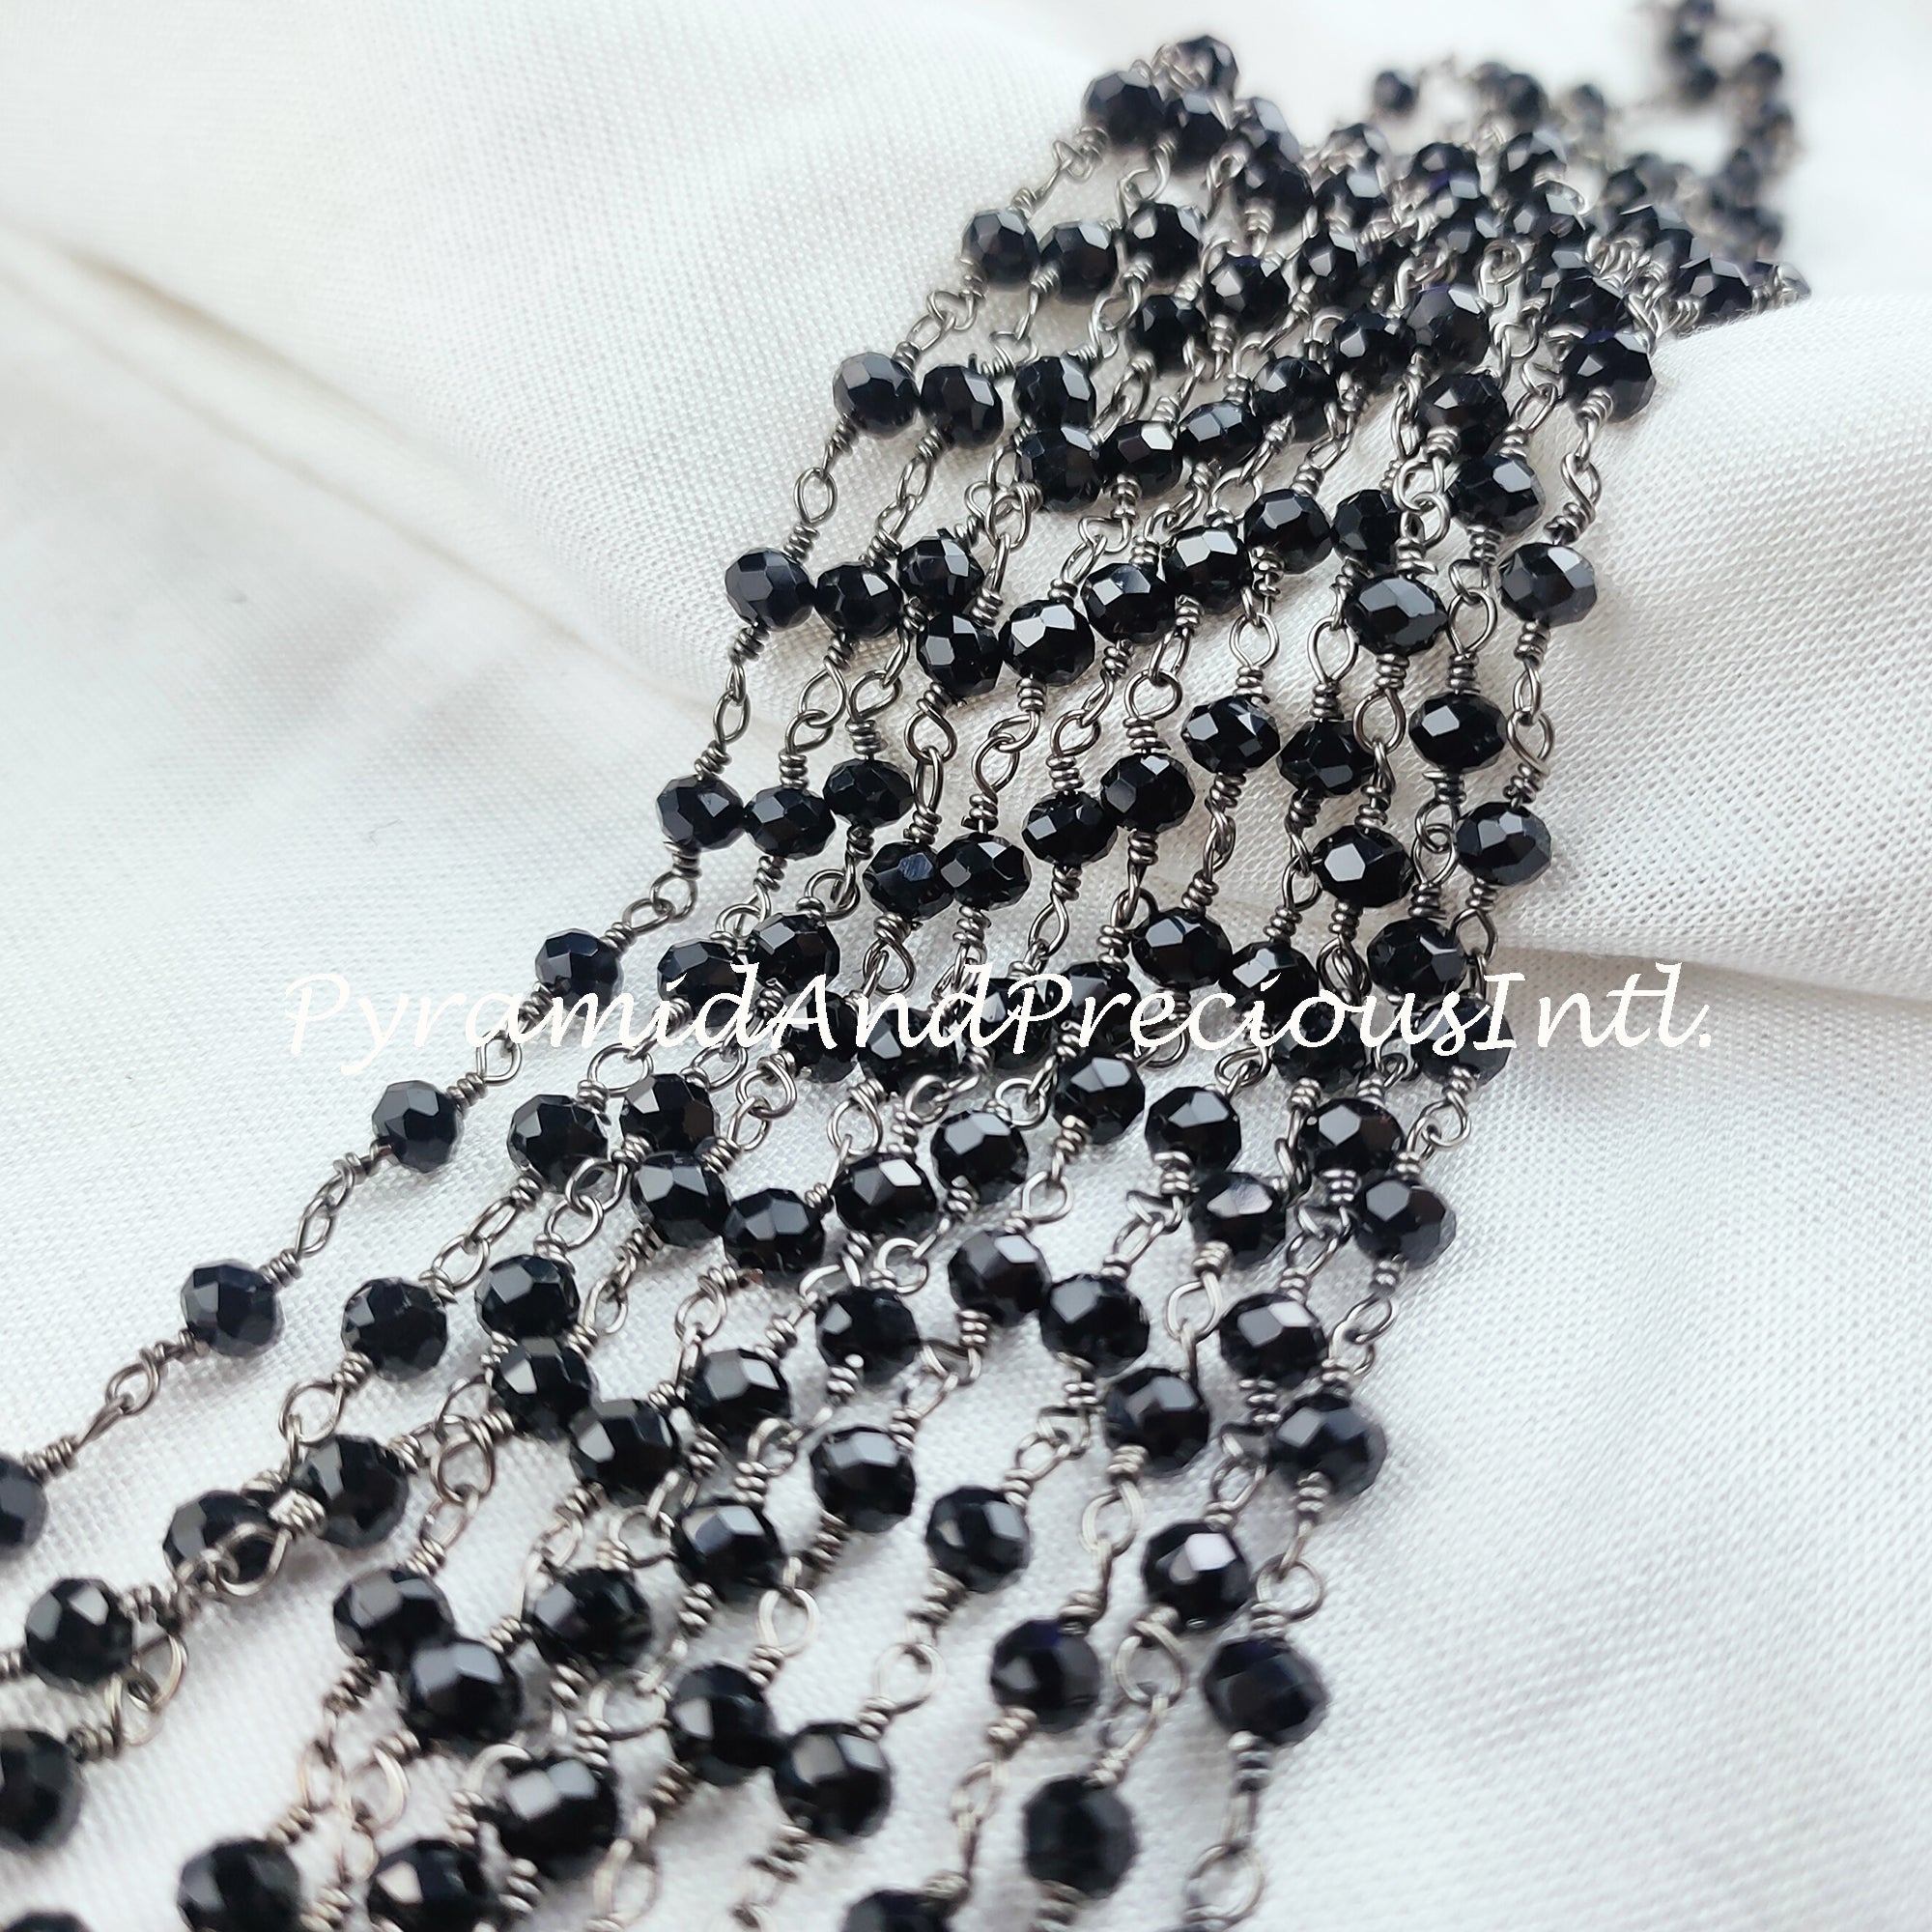 Finished Black Onyx Beaded Chain, Wire Wrapped Onyx Beaded Chain, Rosary Bead Chain Semi Precious, Black Onyx, DIY Jewelry Making Chain,Gift – SELLING BY FOOT